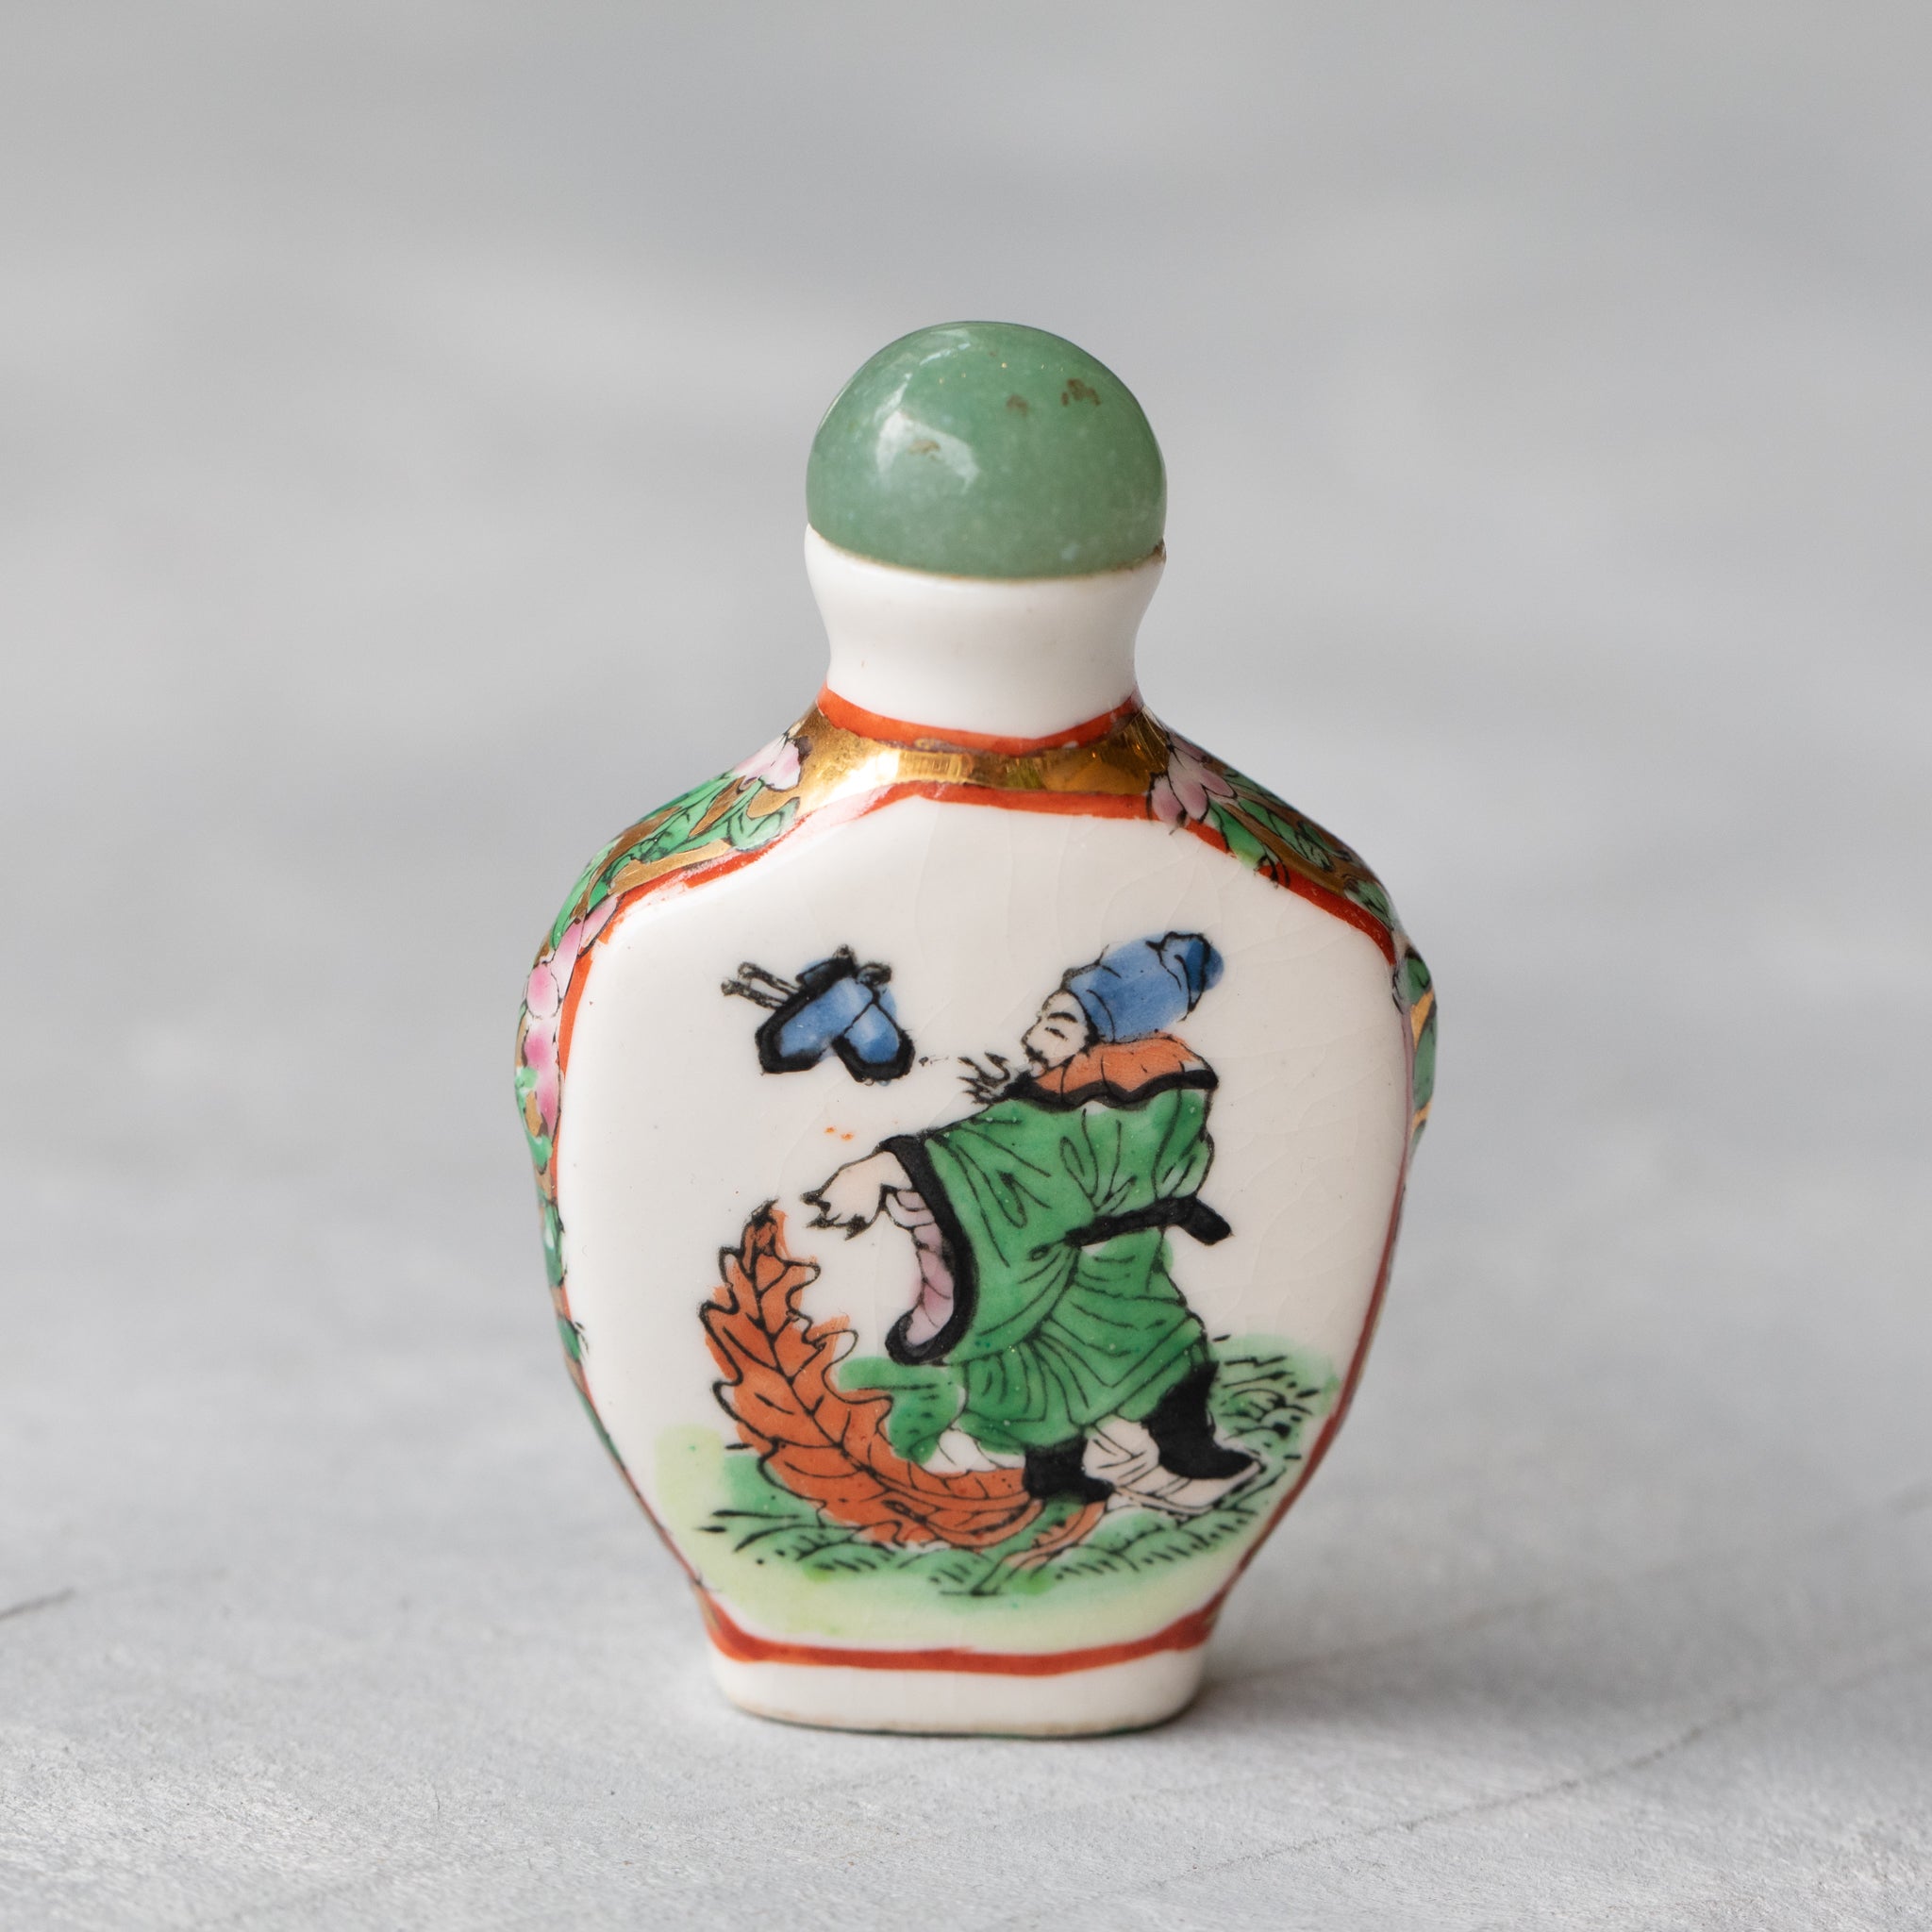 1920s Chinese Snuff Bottle, With Spoon, Cork and Silk Pouch